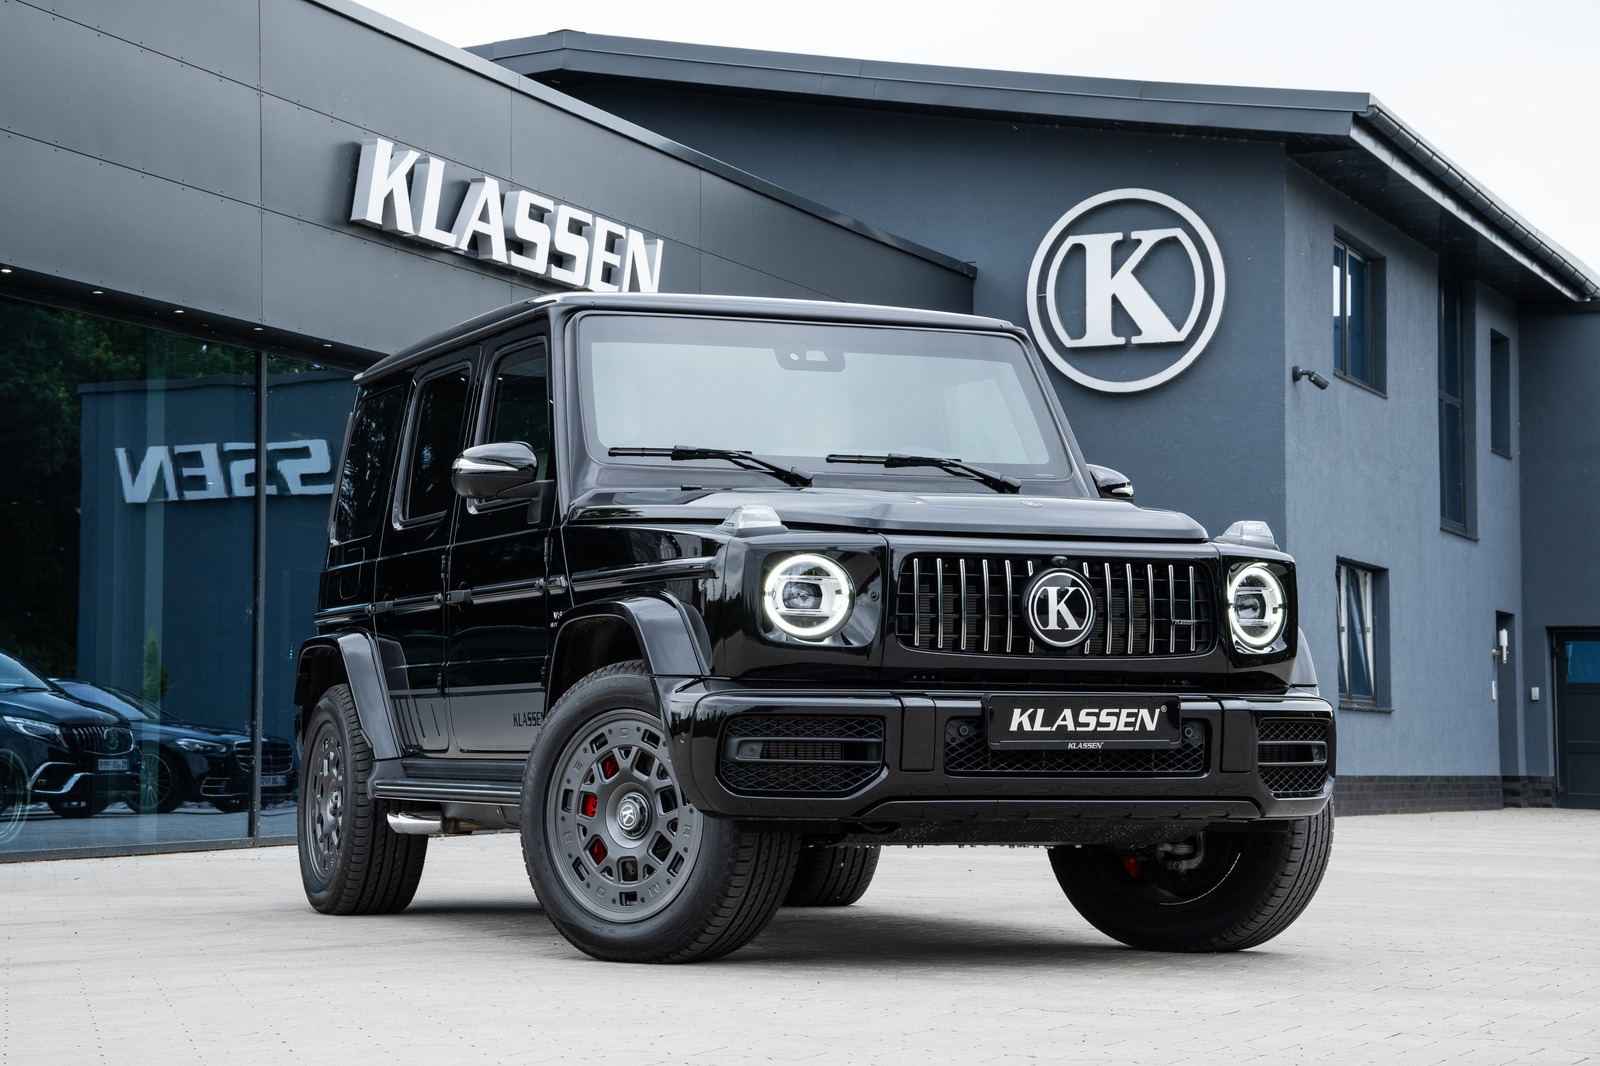 KLASSEN VIP Mercedes-Benz G-Class. Luxury Mercedes-Benz G-Class. G 63 AMG  Armored Vehicles for Sale VR 8 MGR_1496 for sale